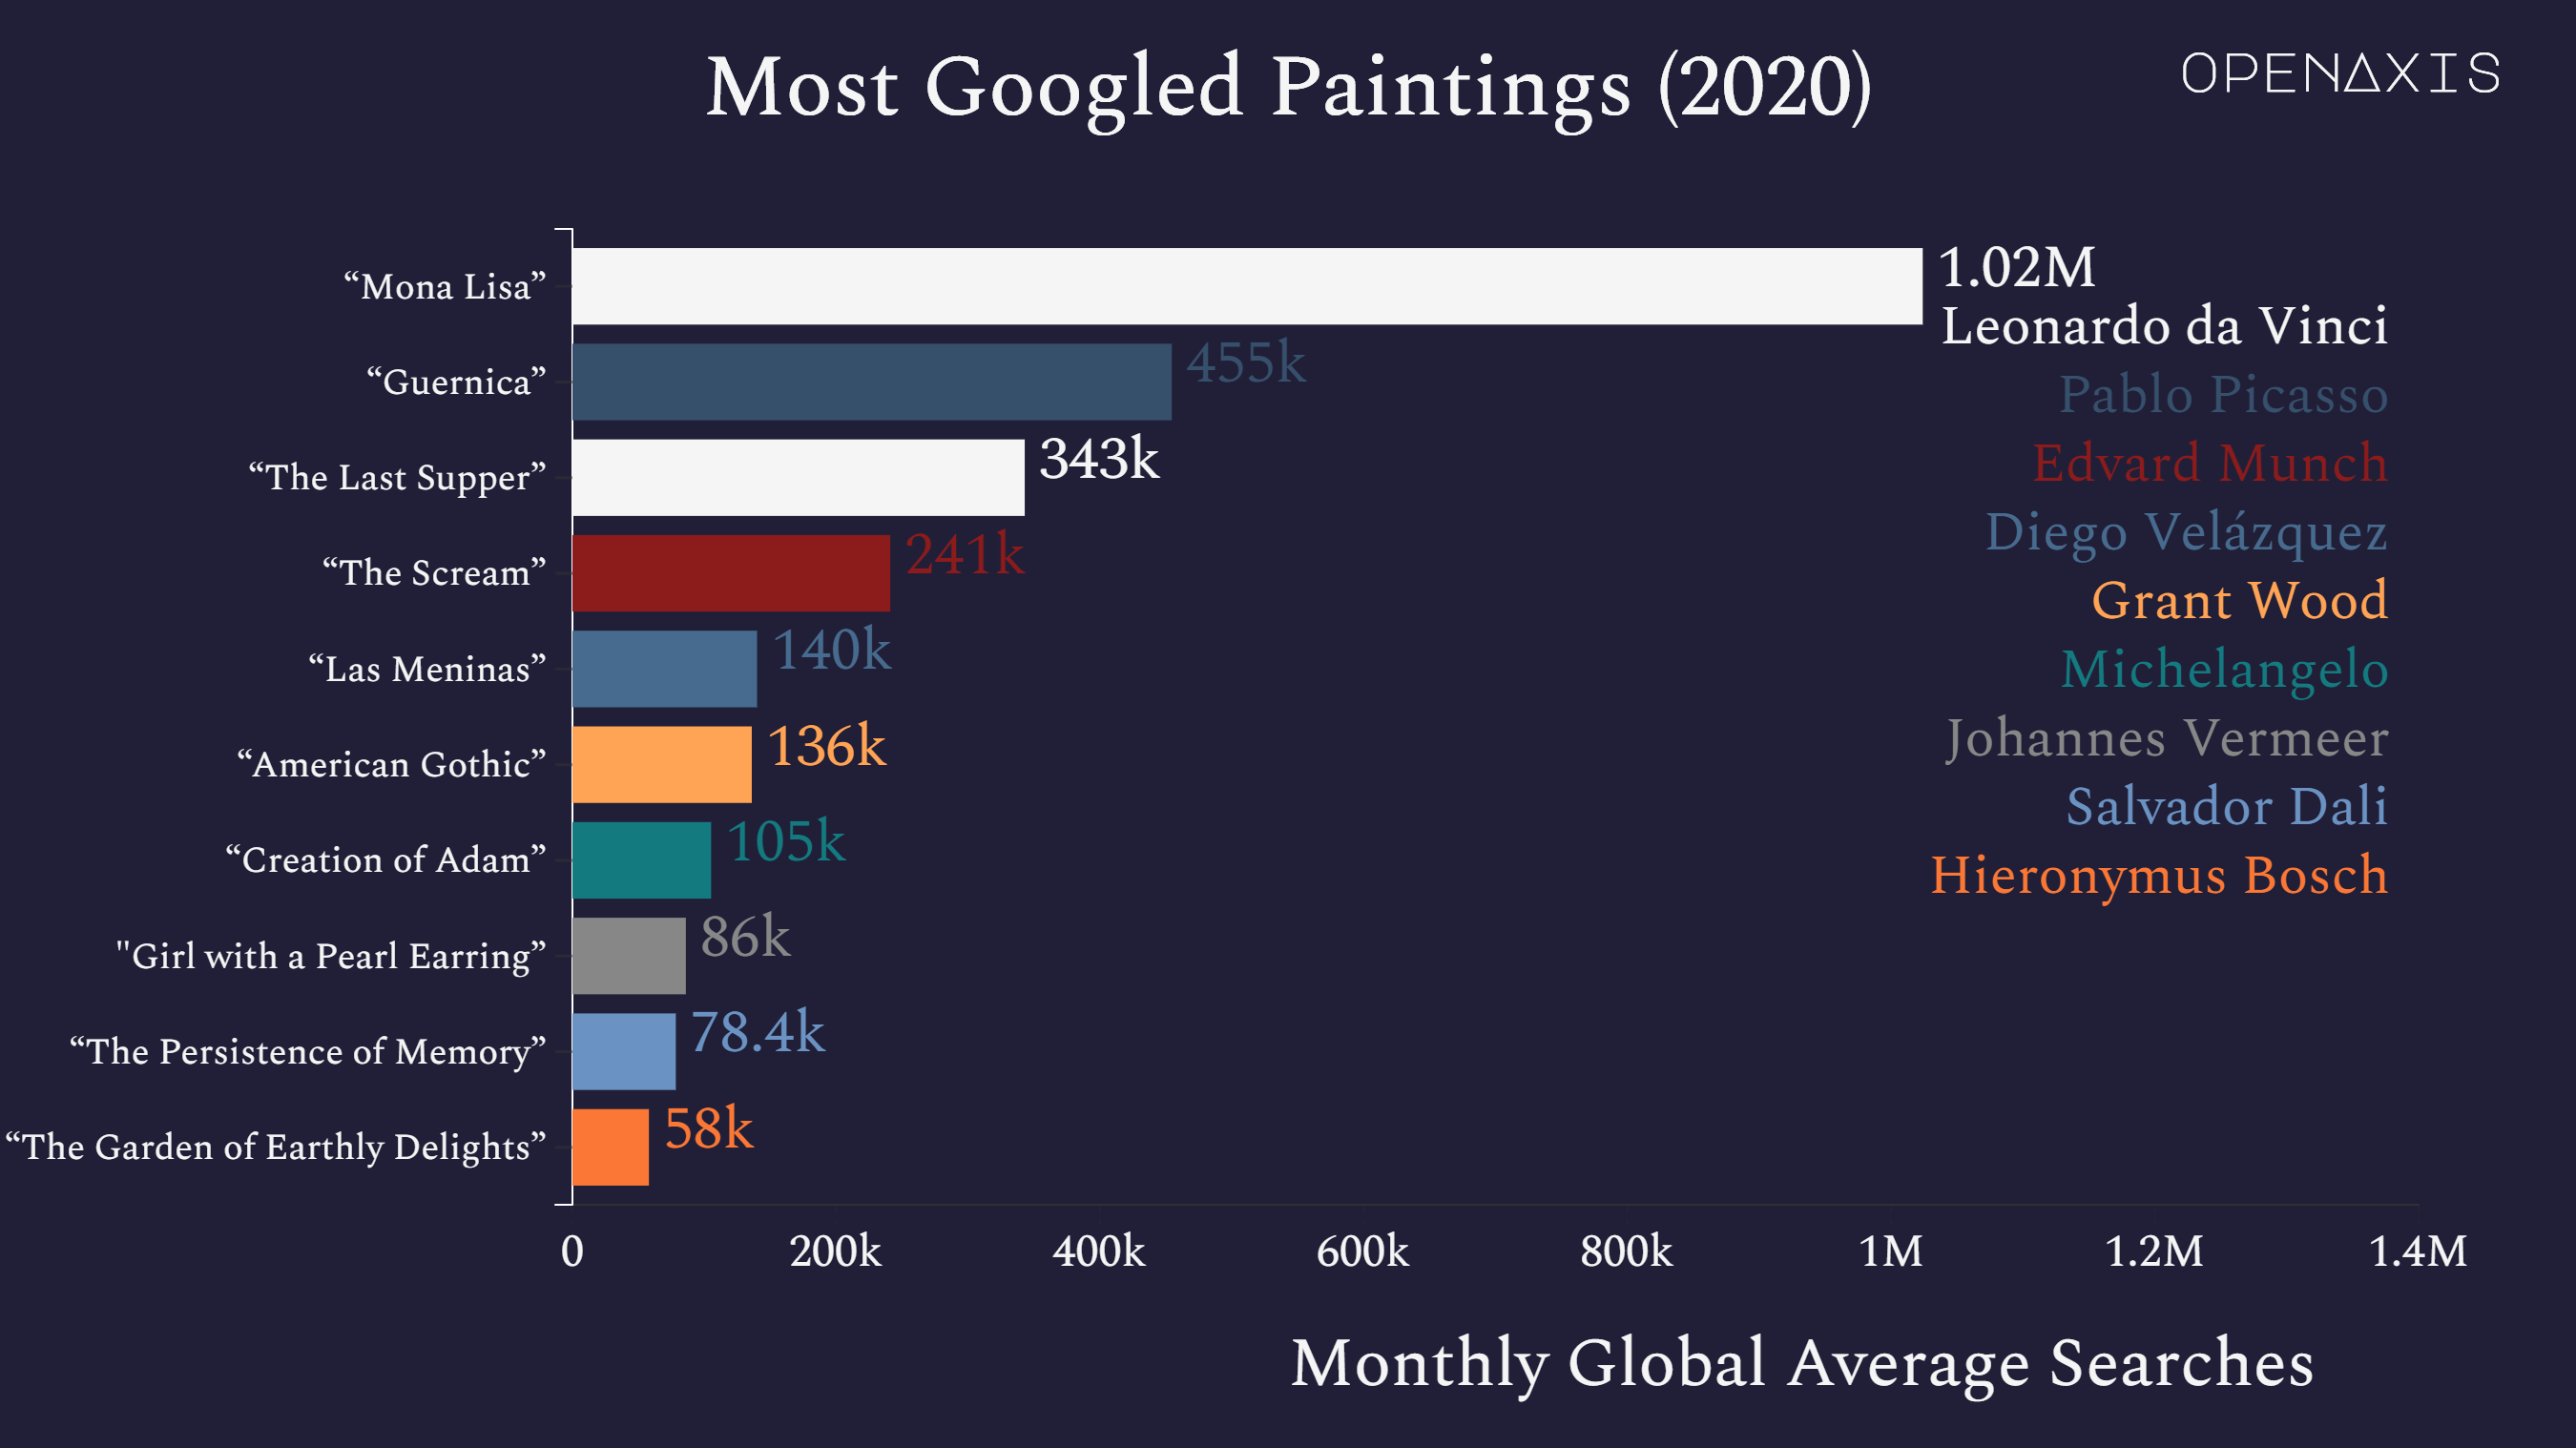 <p>With access to museums and galleries restricted since the COVID-19 pandemic started, millions around the world resorted to the internet to quell their thirst for fine art. So what major artworks did they Google the most in 2020?</p><p><br /></p><p>The list consists of famous masterpieces from the Western canon of art history. Perhaps unsurprisingly, Leonardo da Vinci’s “Mona Lisa” ranks first among the most searched paintings of last year with over one million online searches on average each month. Pablo Picasso’s “Guernica” comes second, with almost half the monthly average search volume (454,500). In third is da Vinci’s Last Supper (343,000).</p><p><br /></p><p><span data-index="0" data-denotation-char data-id="0" data-value="&lt;a href=&quot;/search?q=%23arts&quot; target=_self&gt;#arts" data-link="/search?q=%23arts">﻿<span contenteditable="false"><span></span><a href="/search?q=%23arts" target="_self">#arts</a></span>﻿</span> <span data-index="0" data-denotation-char data-id="0" data-value="&lt;a href=&quot;/search?q=%23culture&quot; target=_self&gt;#culture" data-link="/search?q=%23culture">﻿<span contenteditable="false"><span></span><a href="/search?q=%23culture" target="_self">#culture</a></span>﻿</span> </p><p><br /></p><p>Source: <a href="/data/3994" target="_blank">DIYS.com, Ahrefs</a></p><p><br /></p>